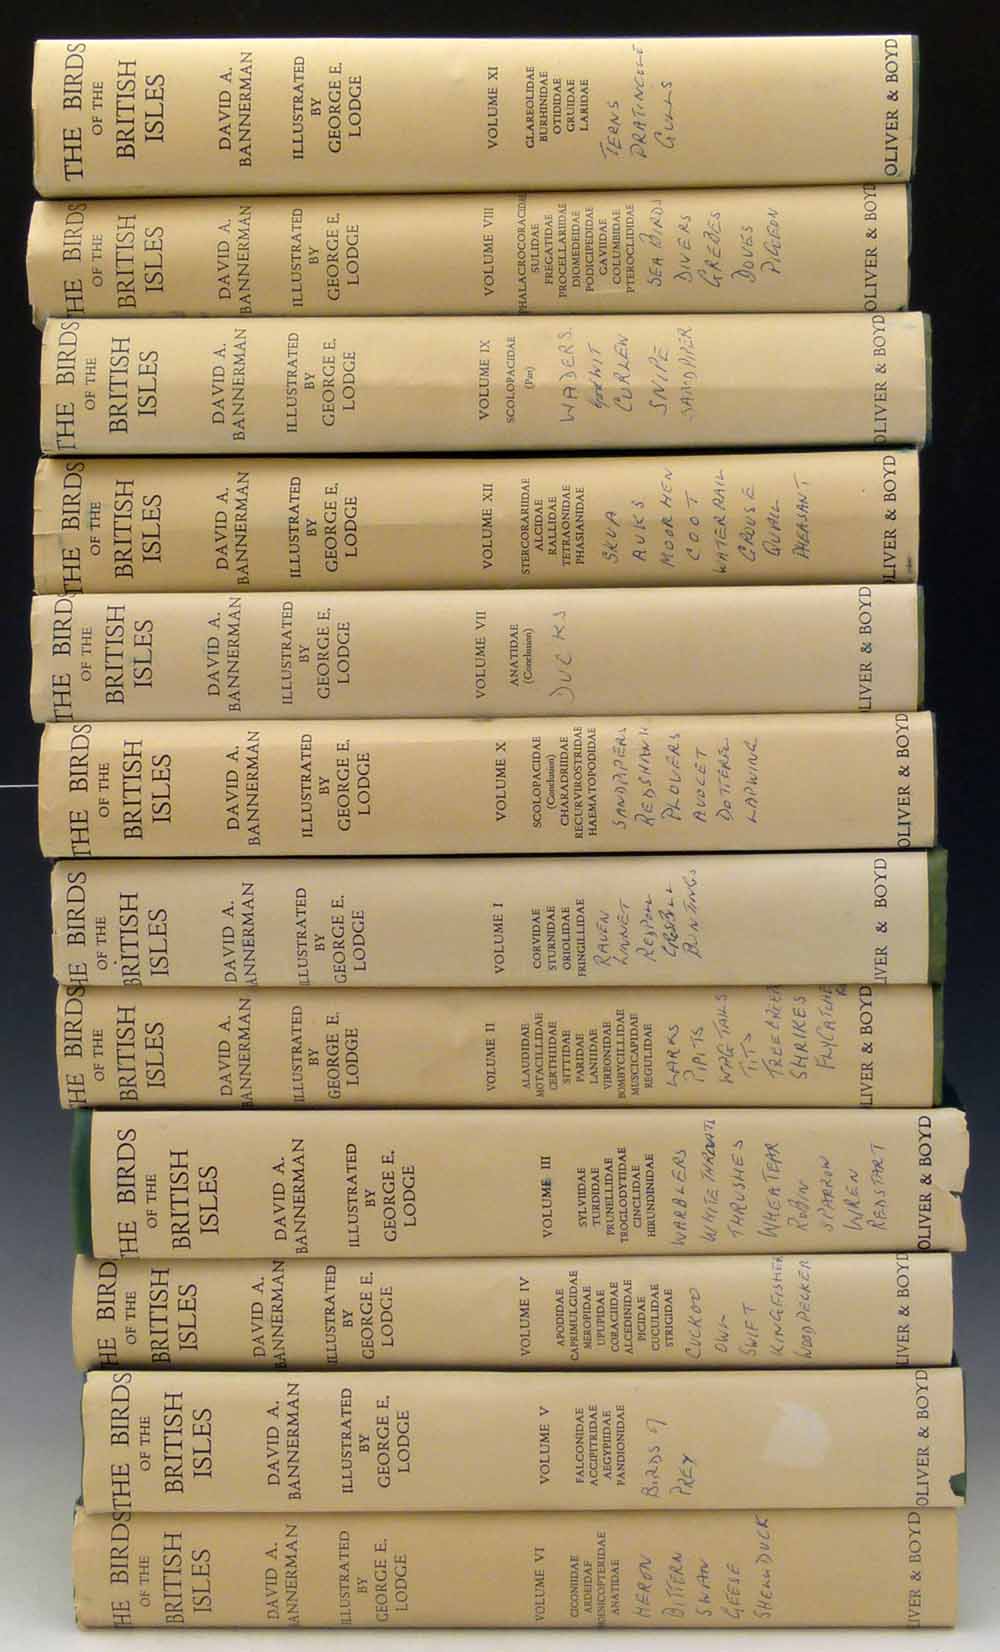 Bannerman & Lodge, The Birds of the British Isles 1953/63, 12 vols, small 4to, green cloth, dust - Image 2 of 3